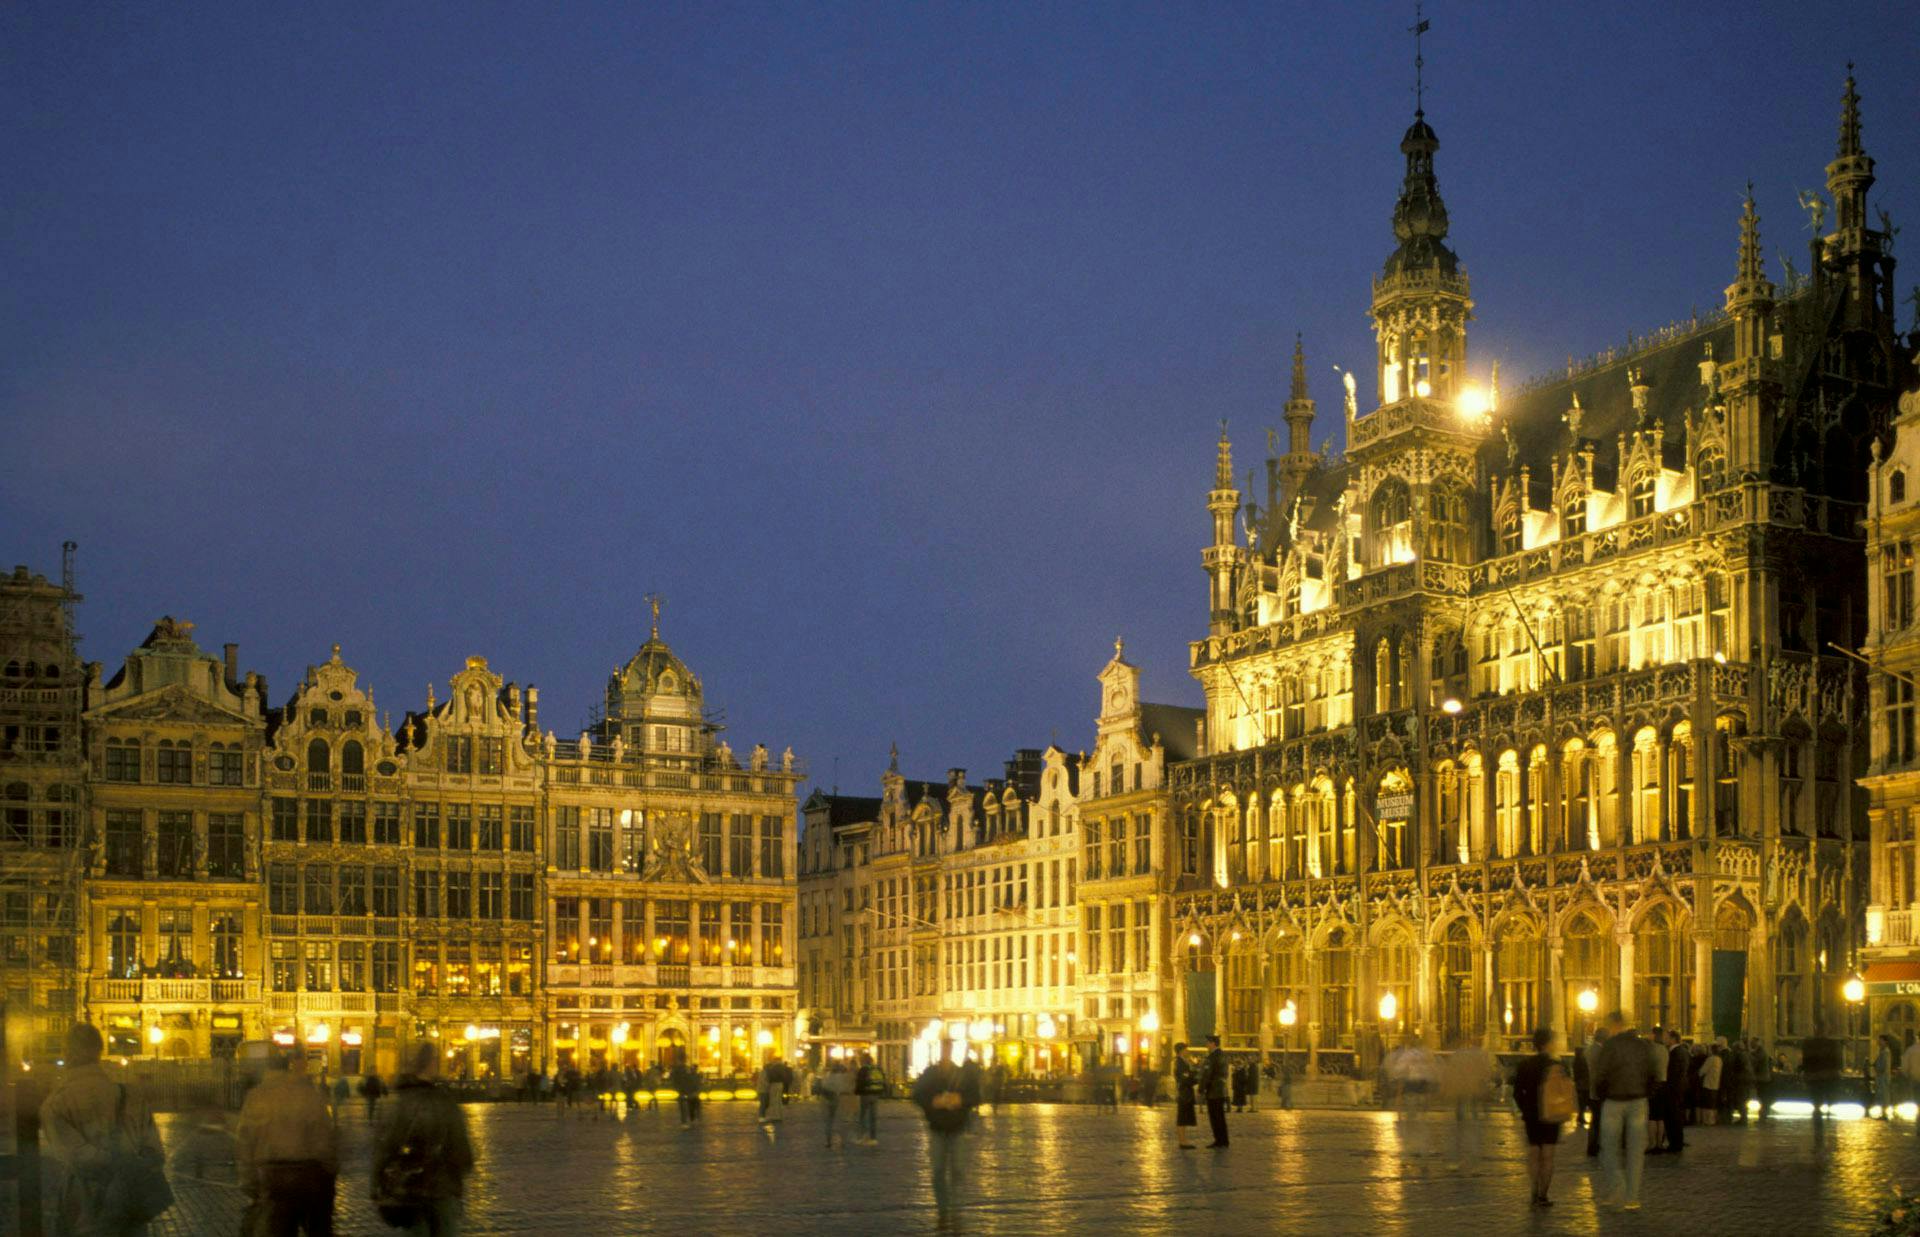 bruxelles,gothic,grand place,heritage,landmark,light,lighting,pl downtown city building urban town architecture person human